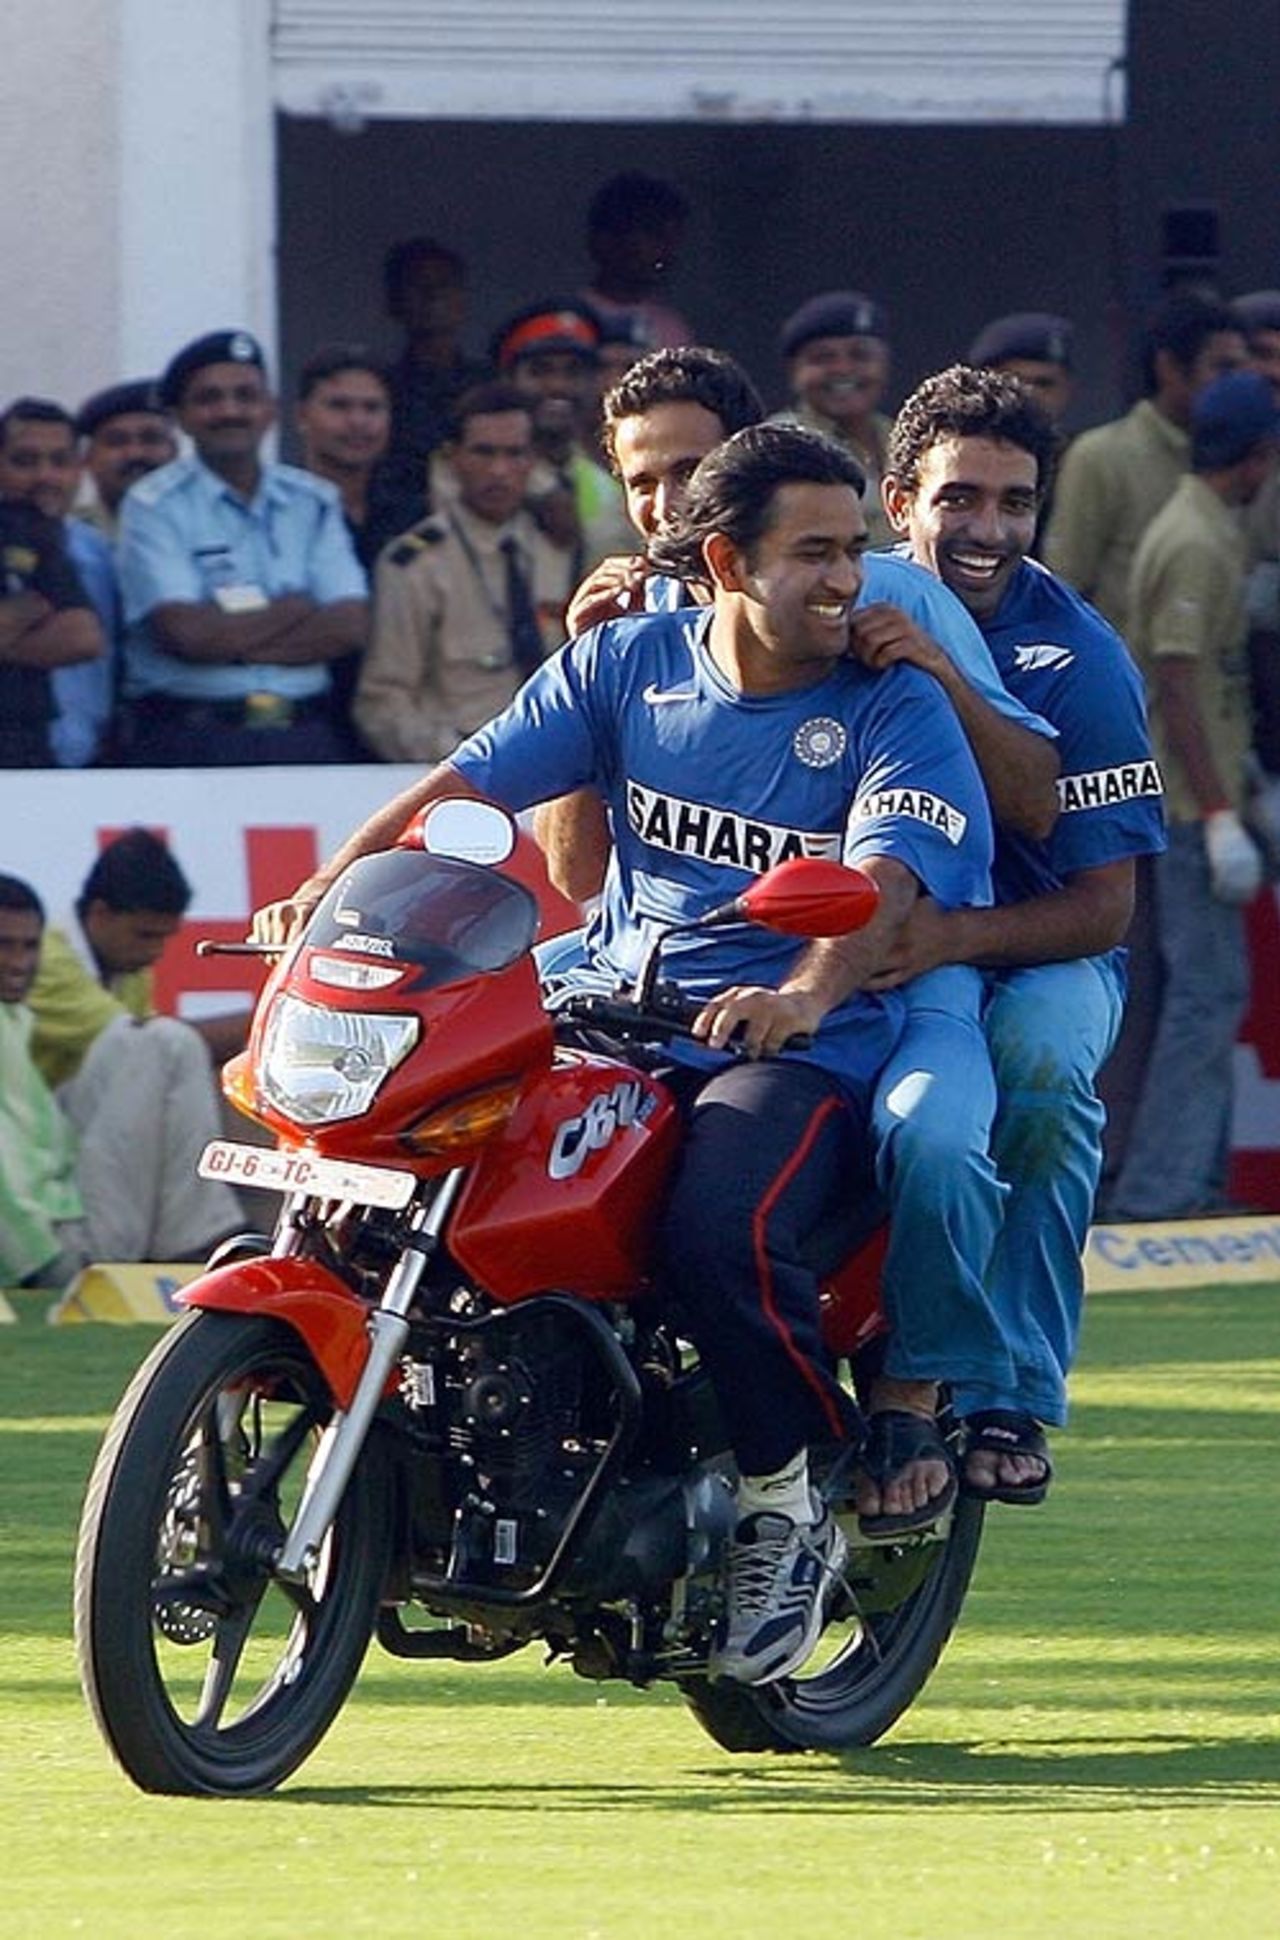 Mahendra Singh Dhoni, Irfan Pathan and Robin Uthappa go for a spin, India v West Indies, 4th ODI, Vadodara, January 31, 2007